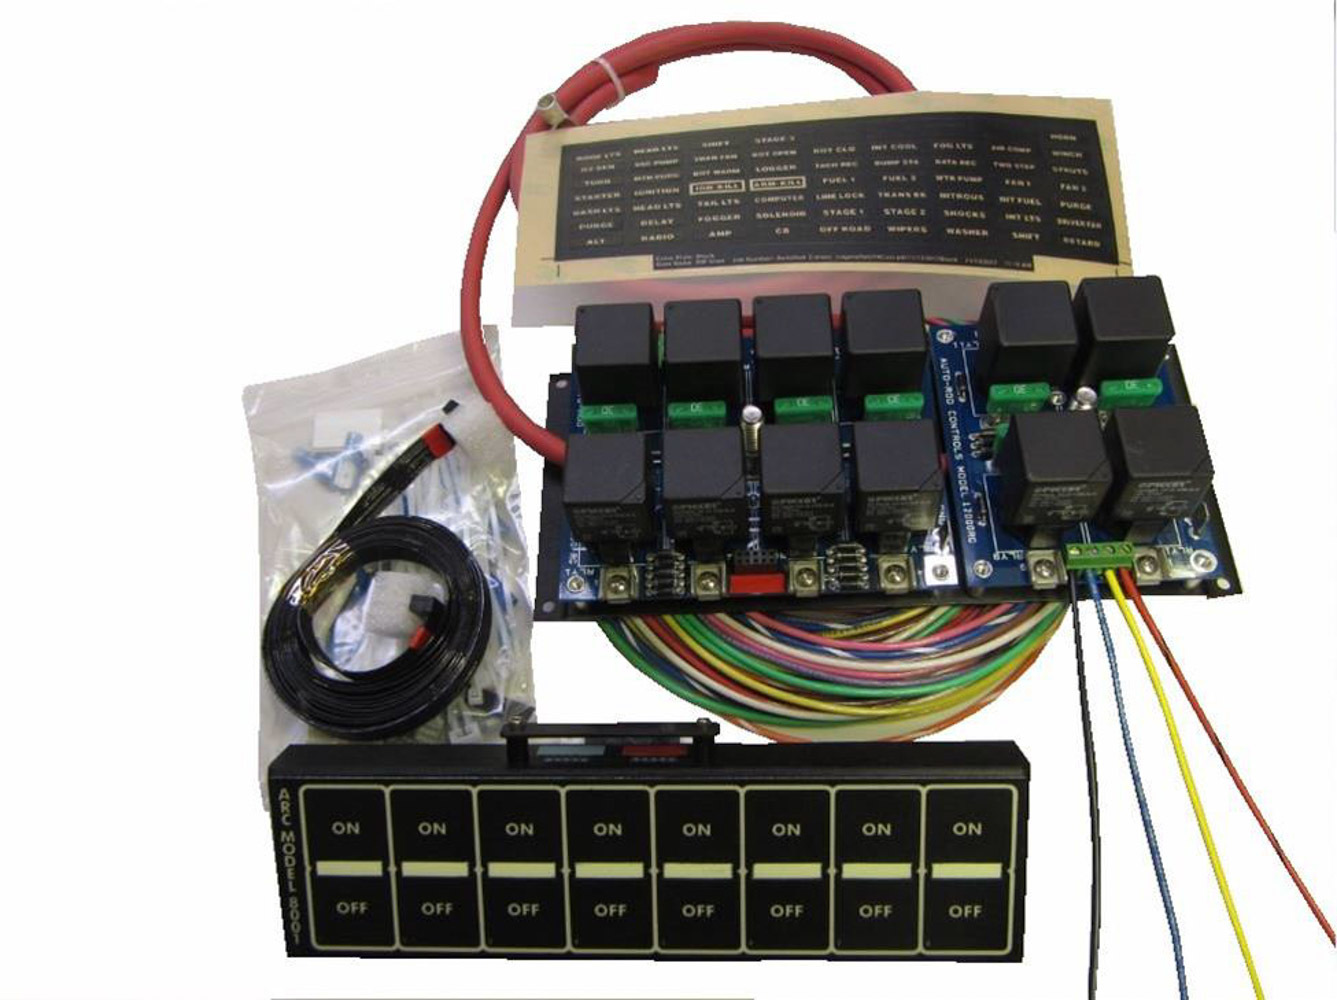 Auto Rod Controls 8001D Switch Panel, Model 8001, Dash Mount, 8-3/4 x 2-3/8 in, 8 Flat Switches, Fused, Indicator Lights, Relay Board / Wiring Included, Black Panel, Kit